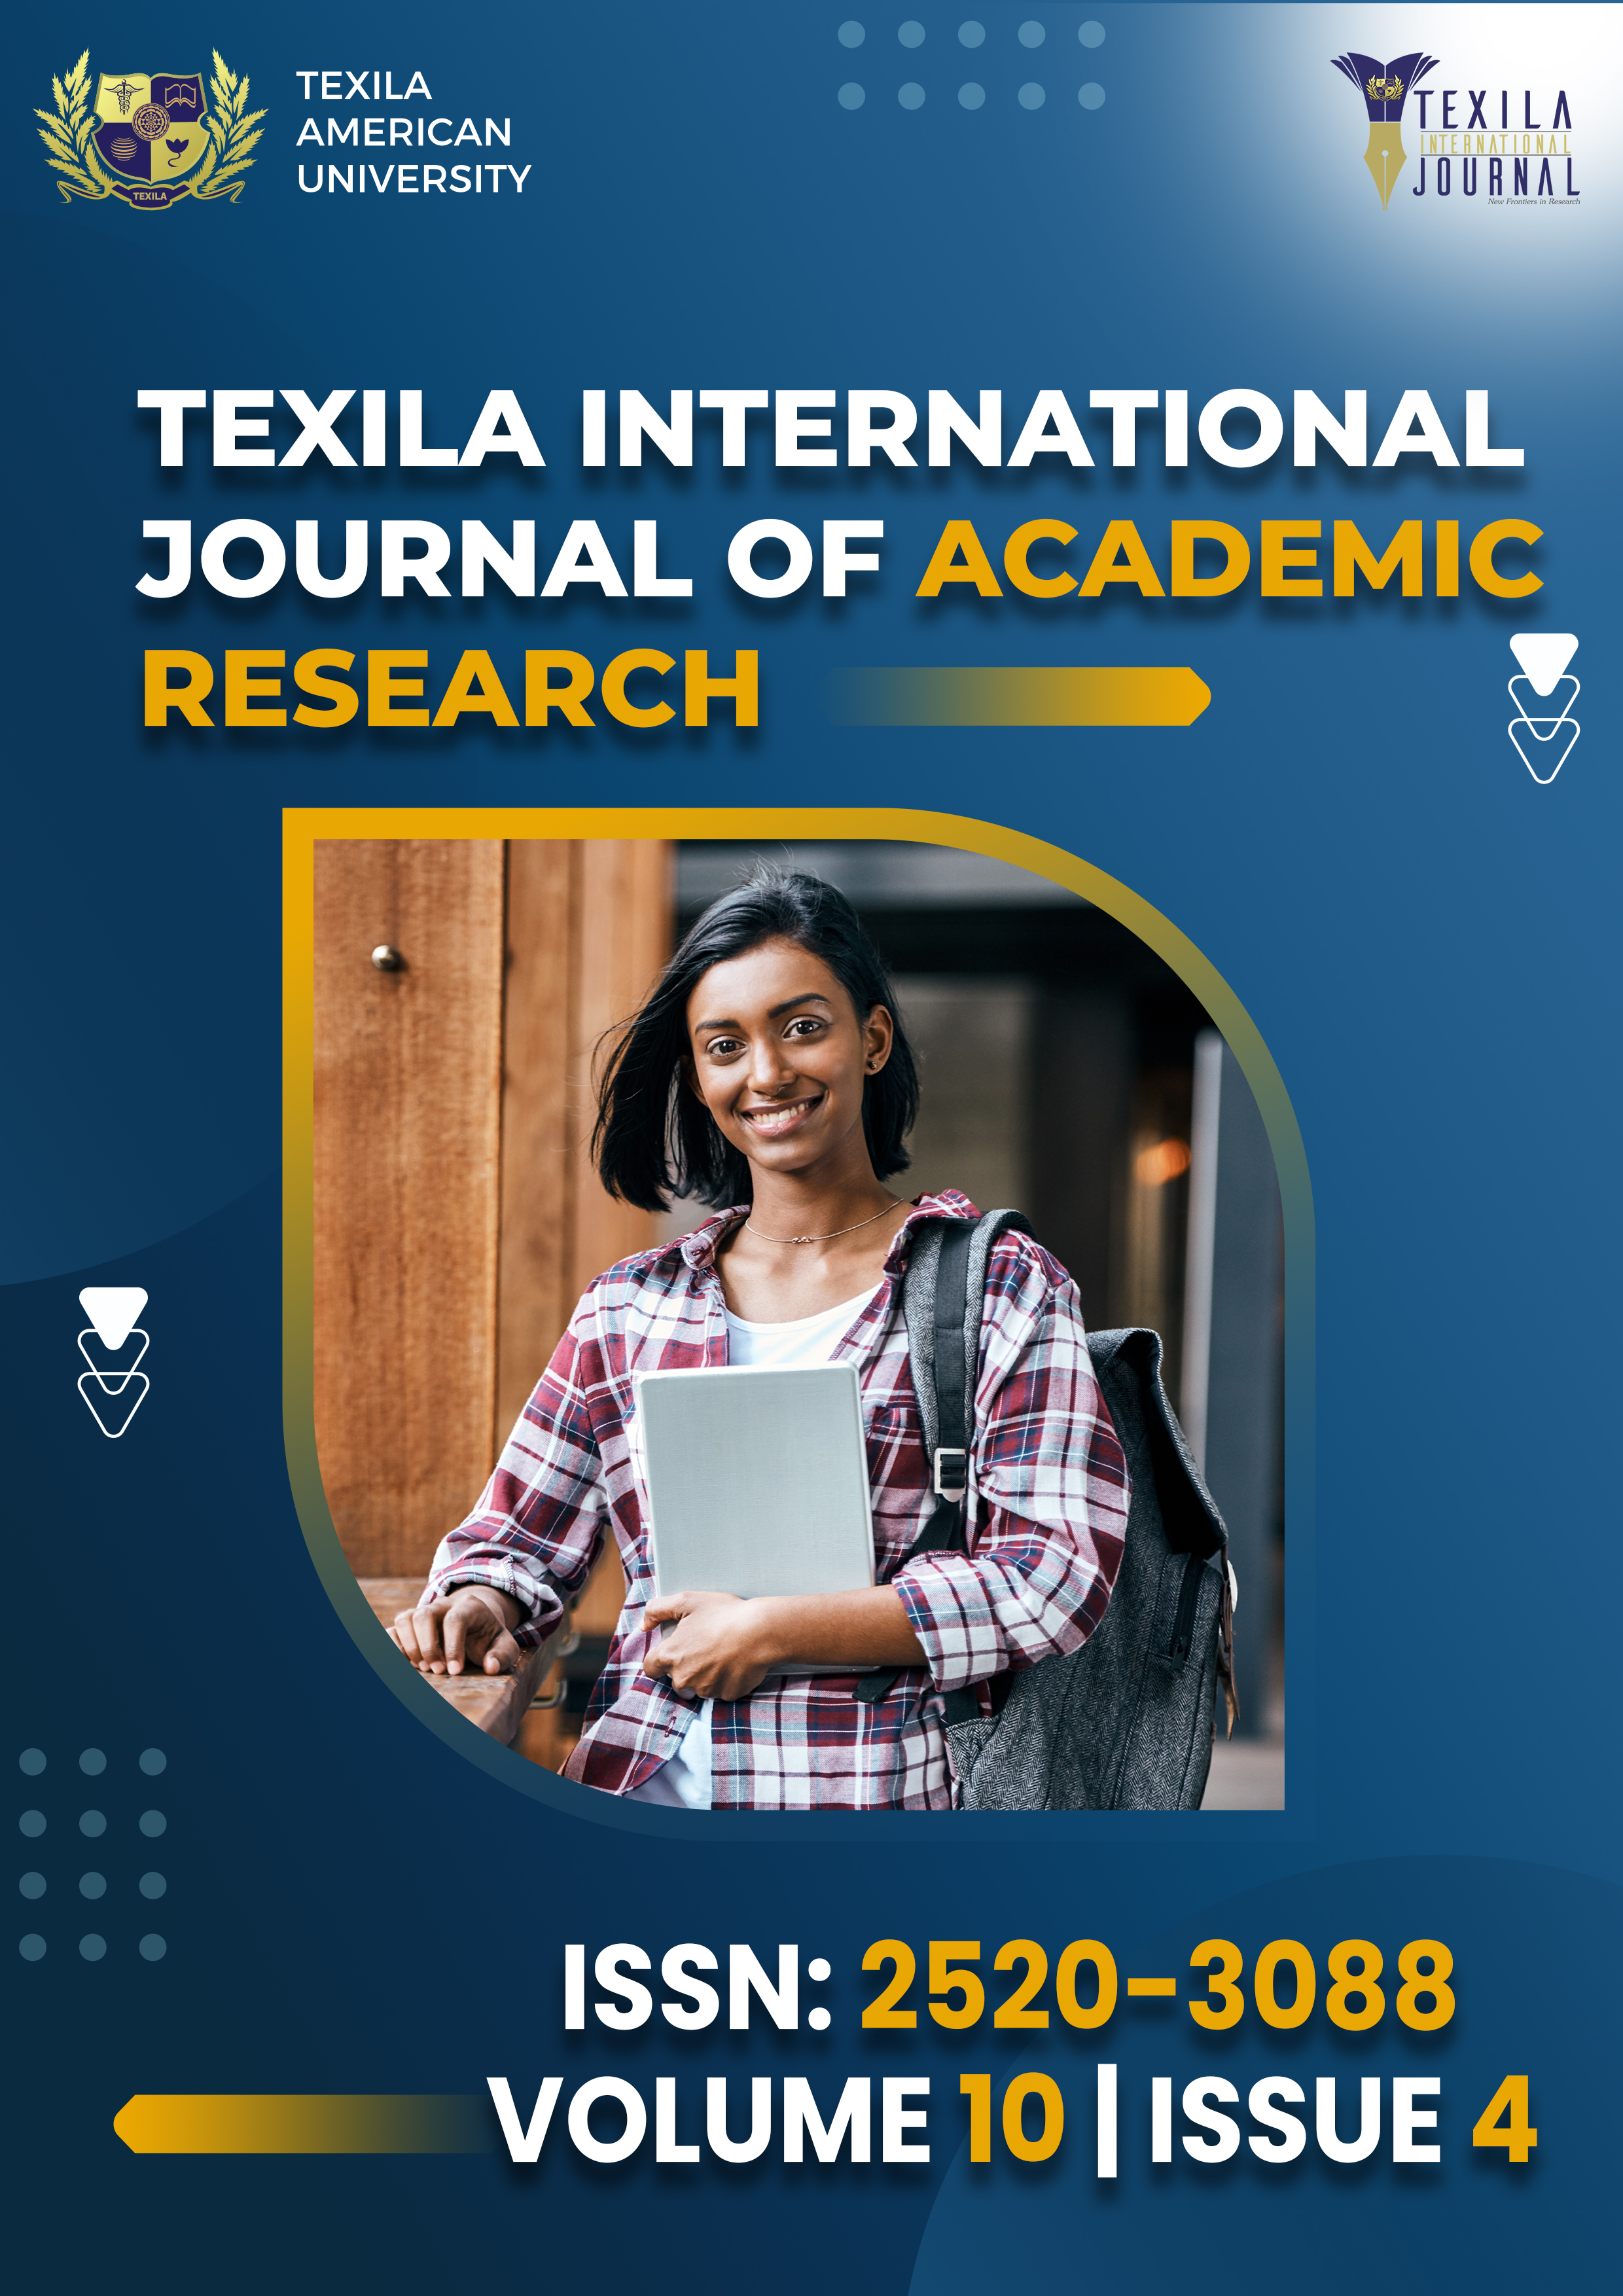 Current Issue Volume 10, Issue 4, TEXILA INTERNATIONAL JOURNAL OF  ACADEMIC RESEARCH